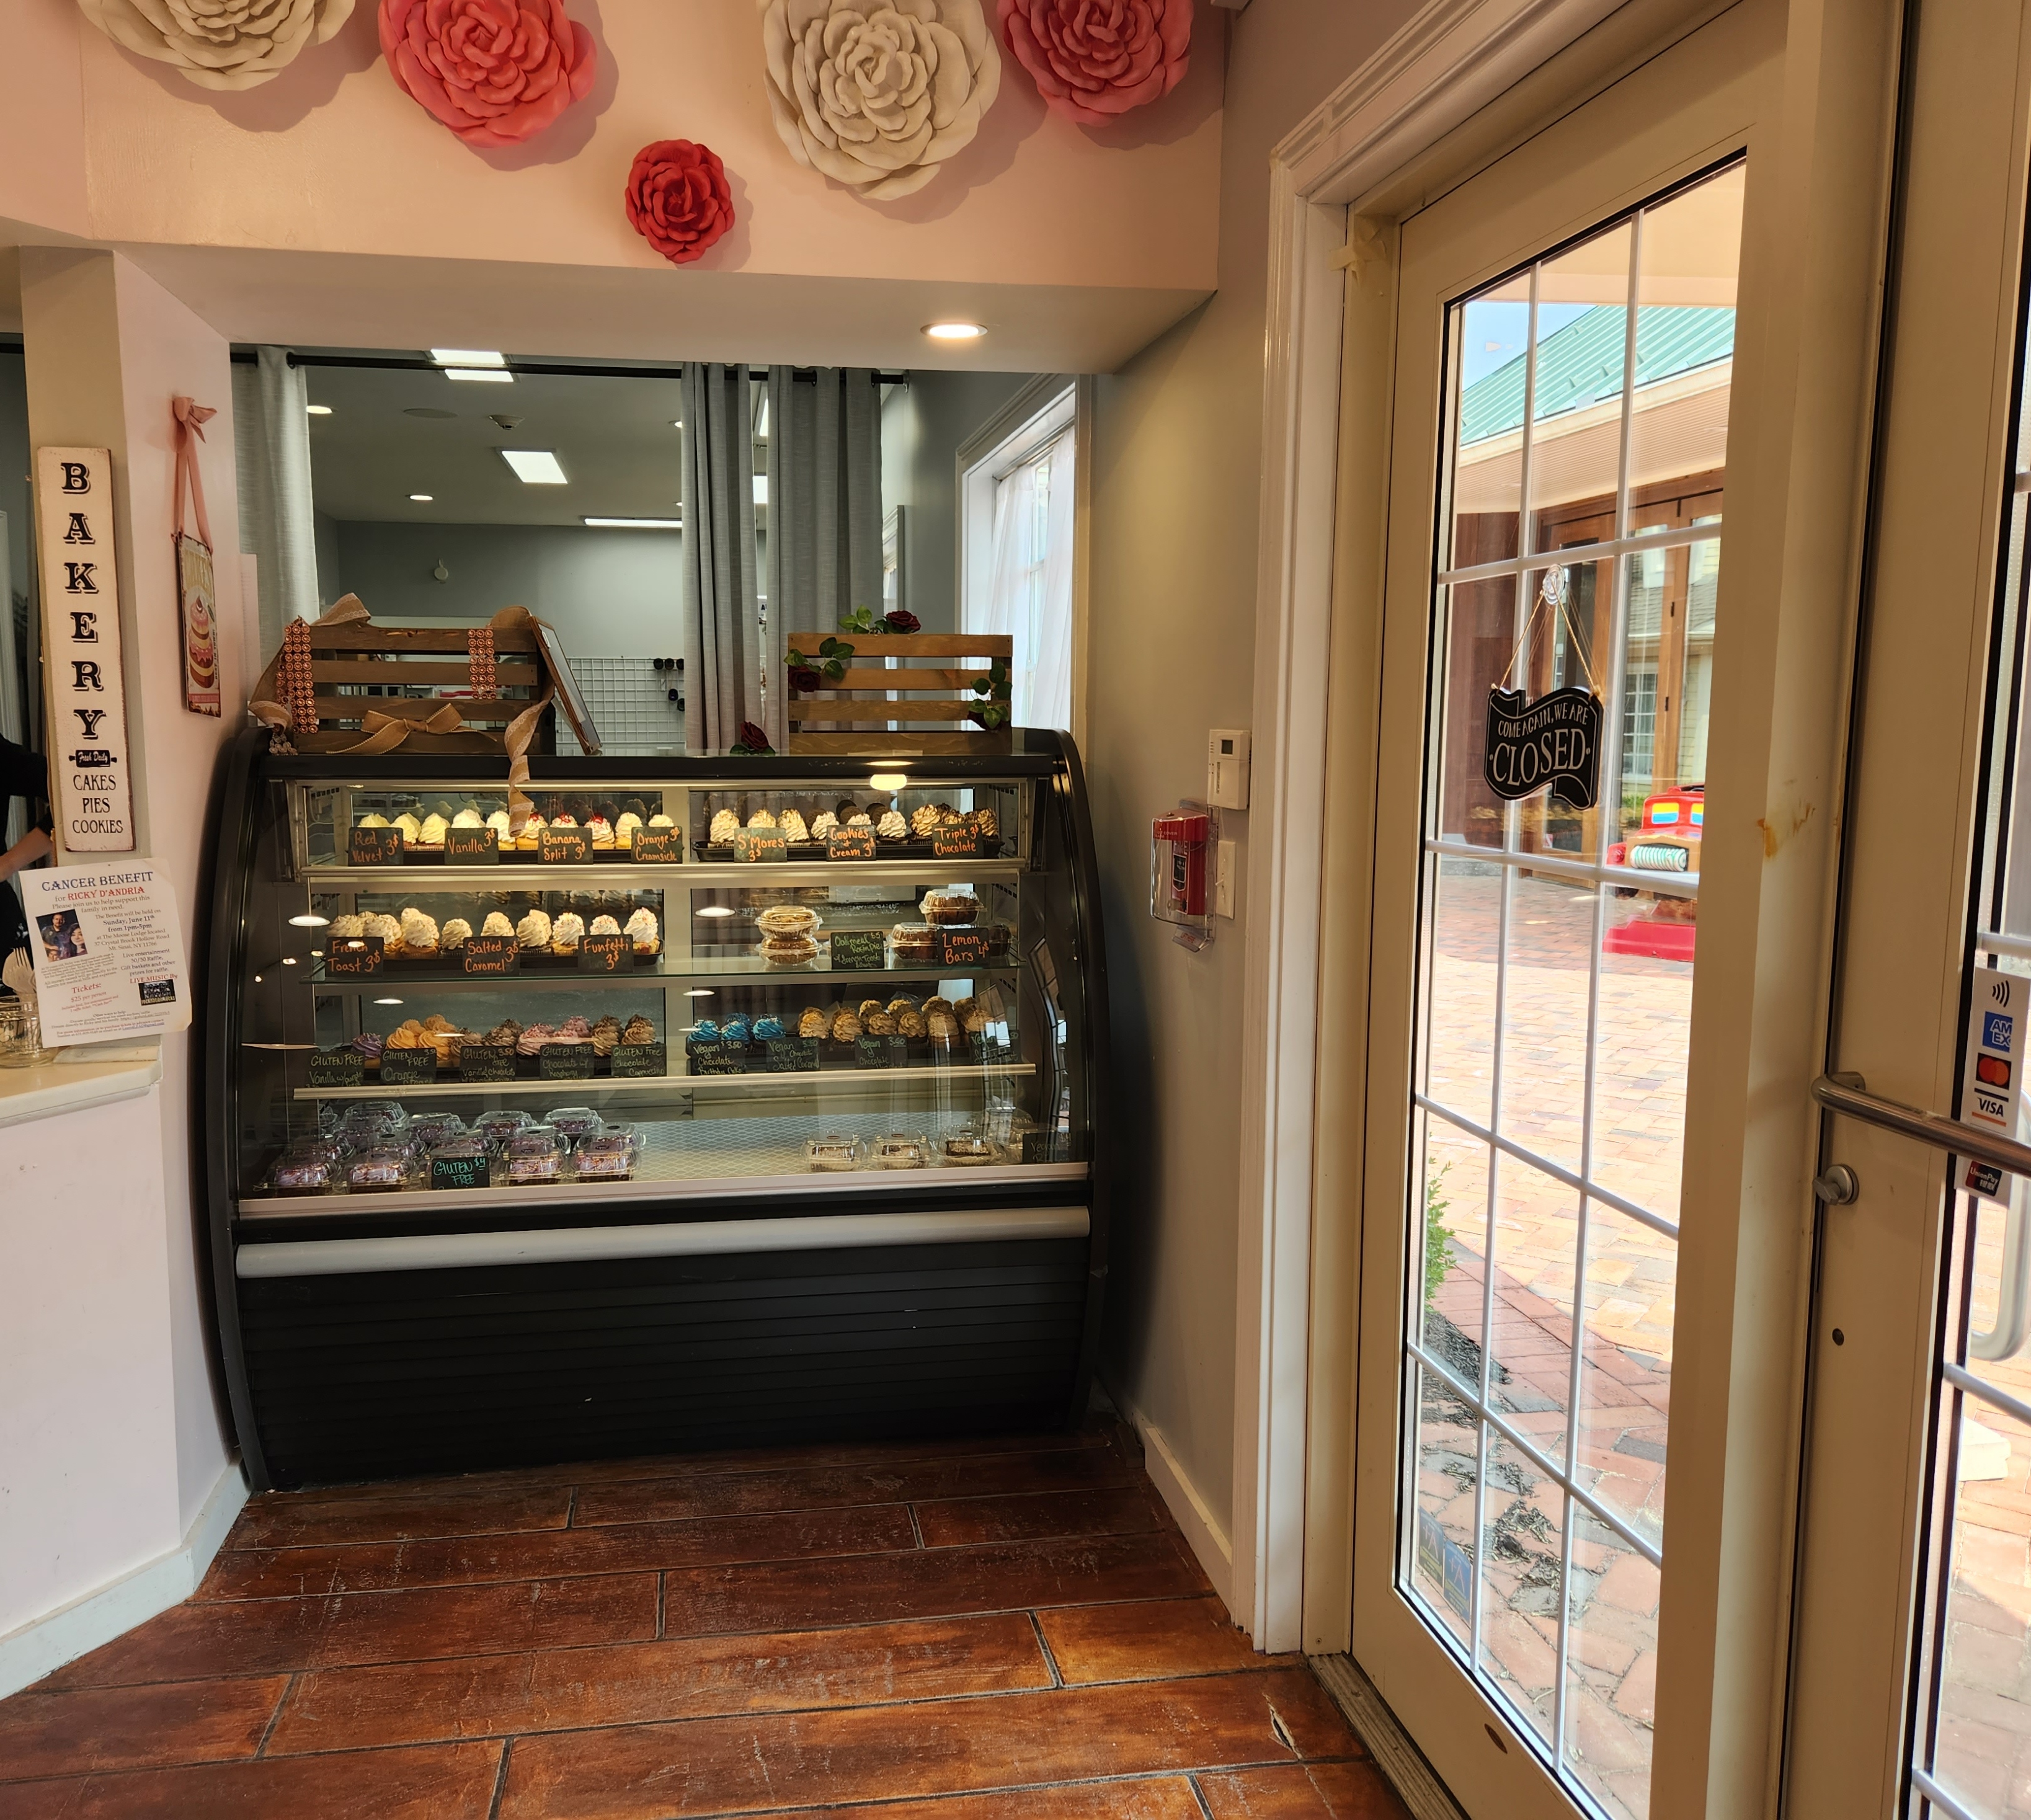 Private Bakery Asset Sale in New York